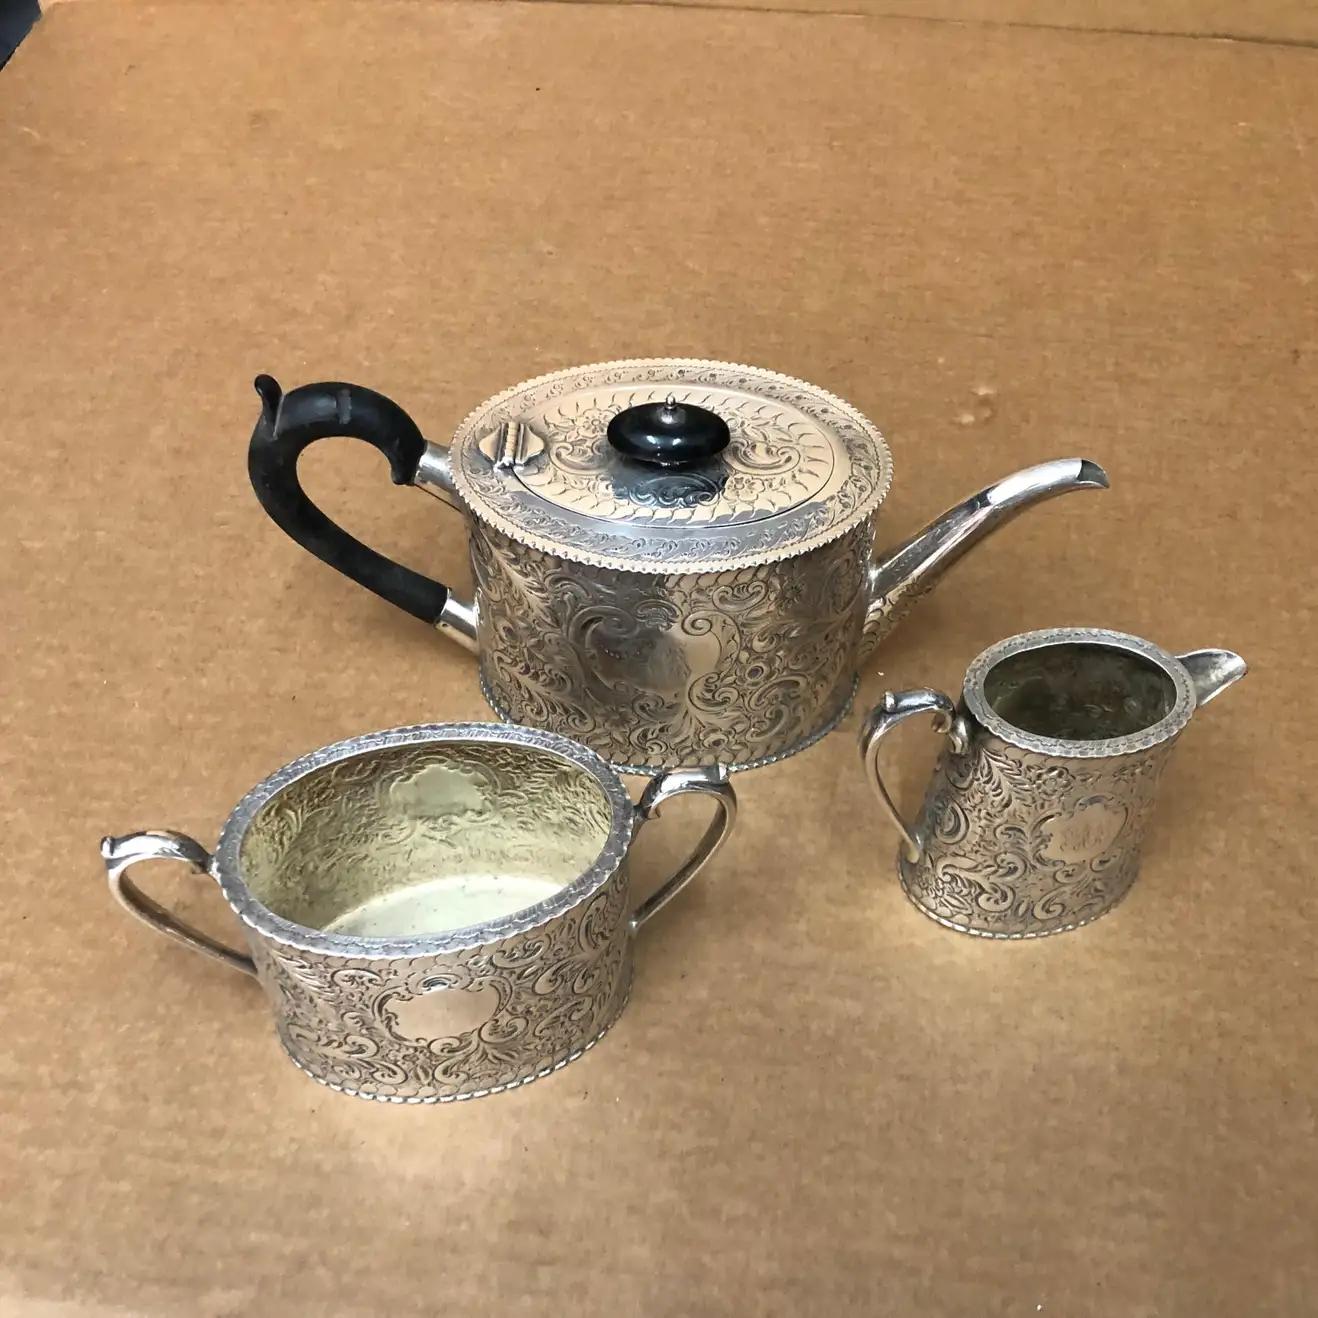 A rare three pieces tea set made in England in the second part of the 19th century. It's signed in the bottom Pearce Leeds & Huddersfield. Dimensions are of the tea pot.